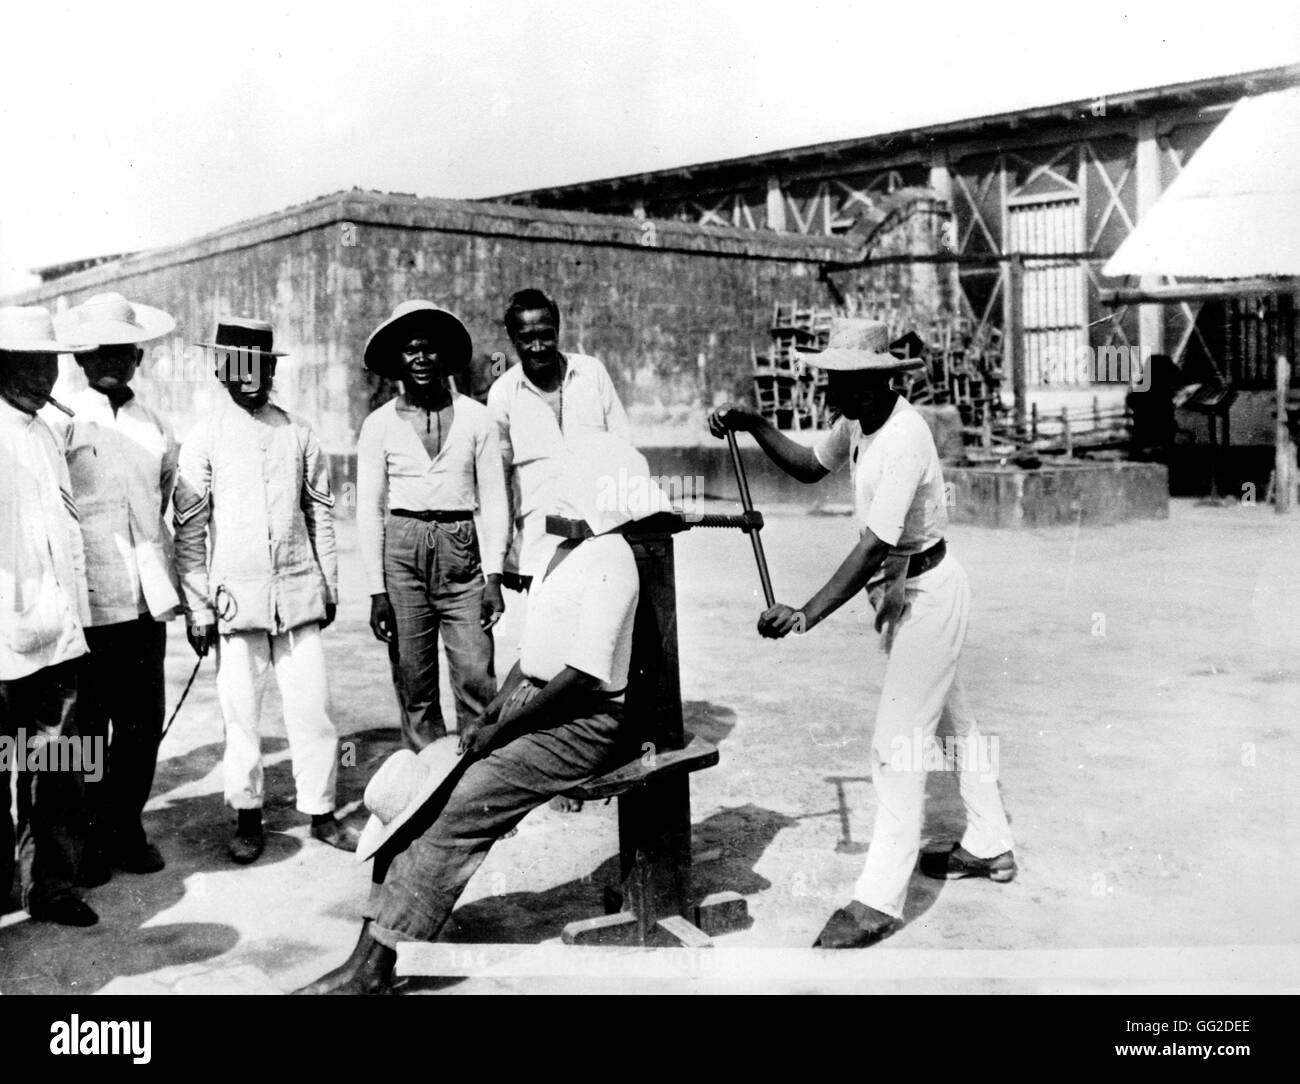 The garotte torture: Capital punishment in the prison of Bilidid in the Philippines End of 19th century United States - Hispano-American war Stock Photo